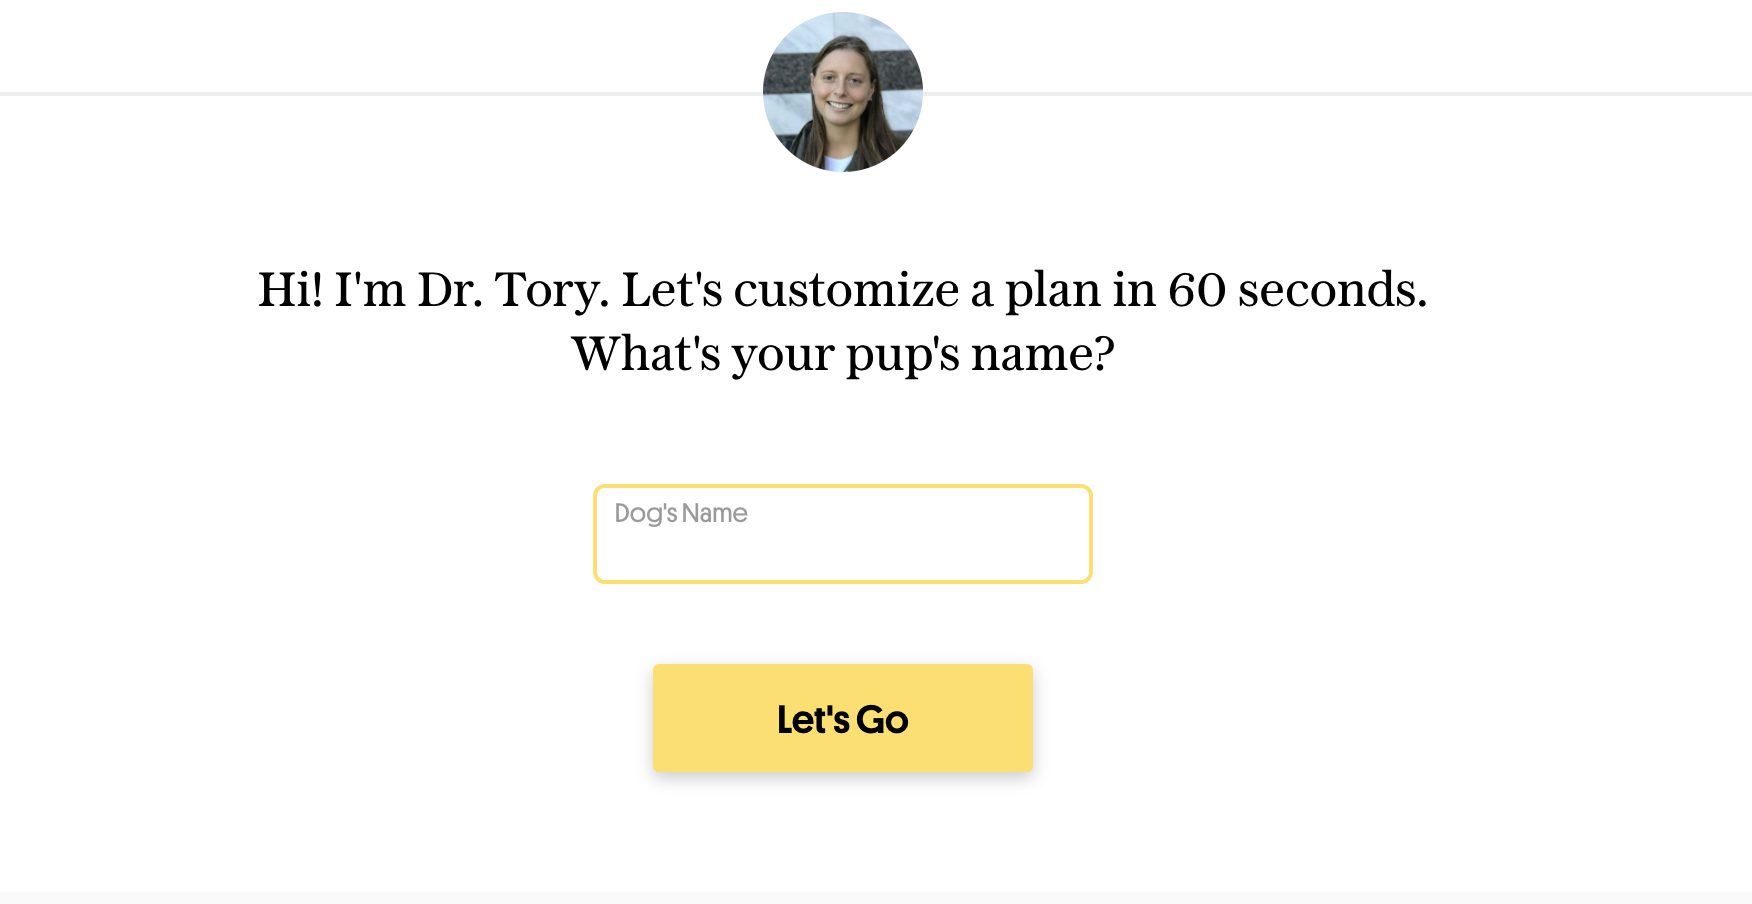 screenshot of the page where ti takes 60 seconds to customize a meal plan for your dog